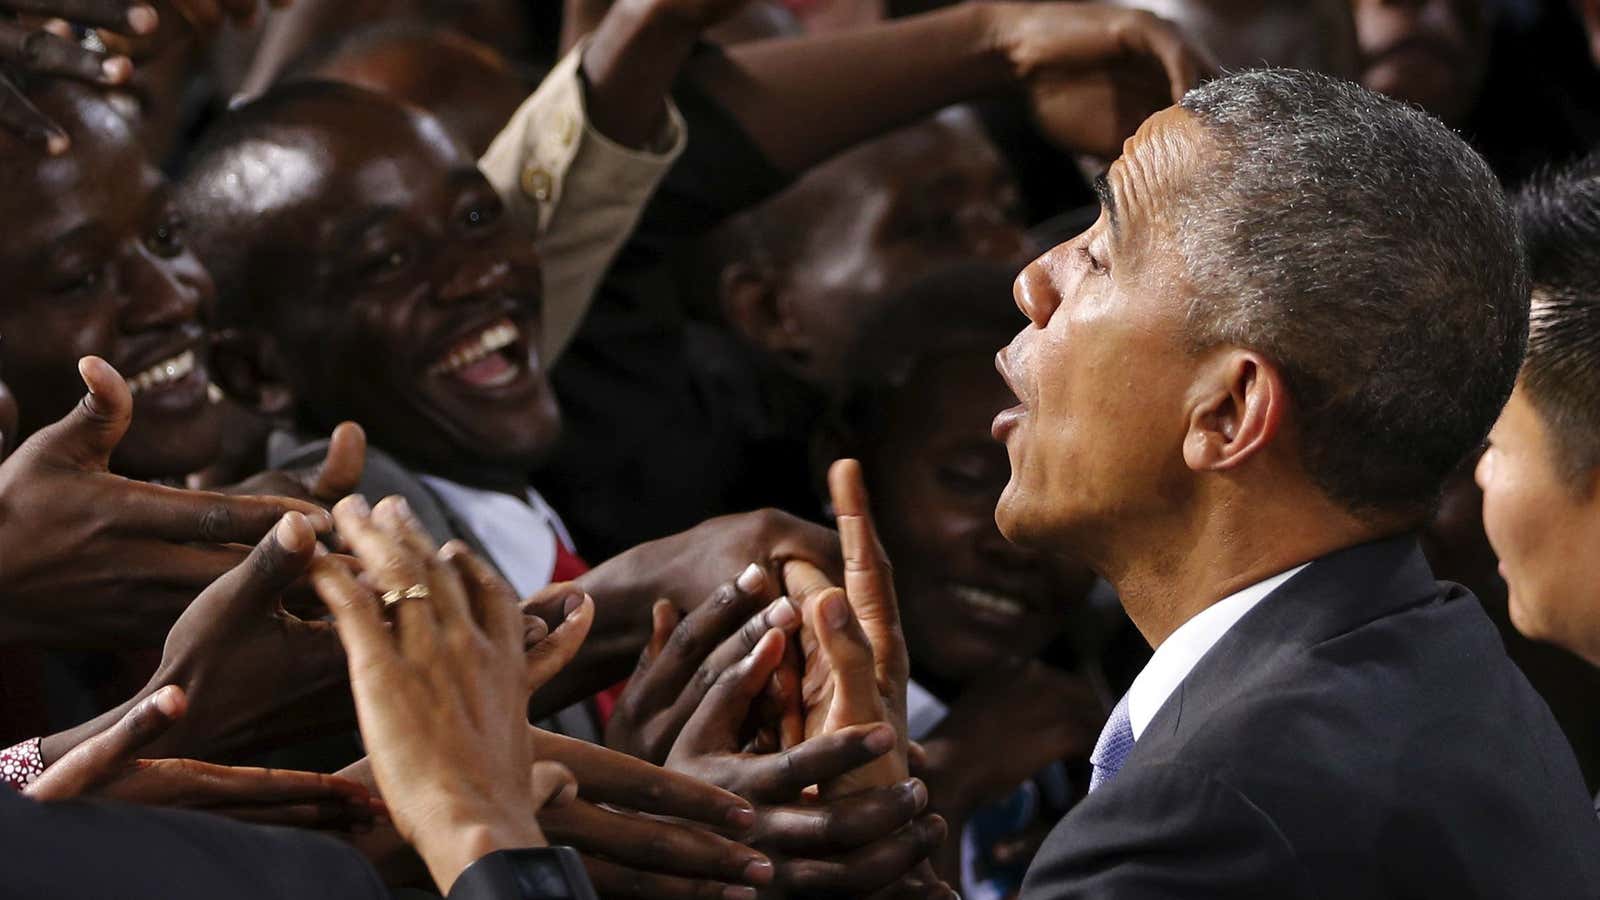 Obama greets a crowd after giving a speech in Nairobi.